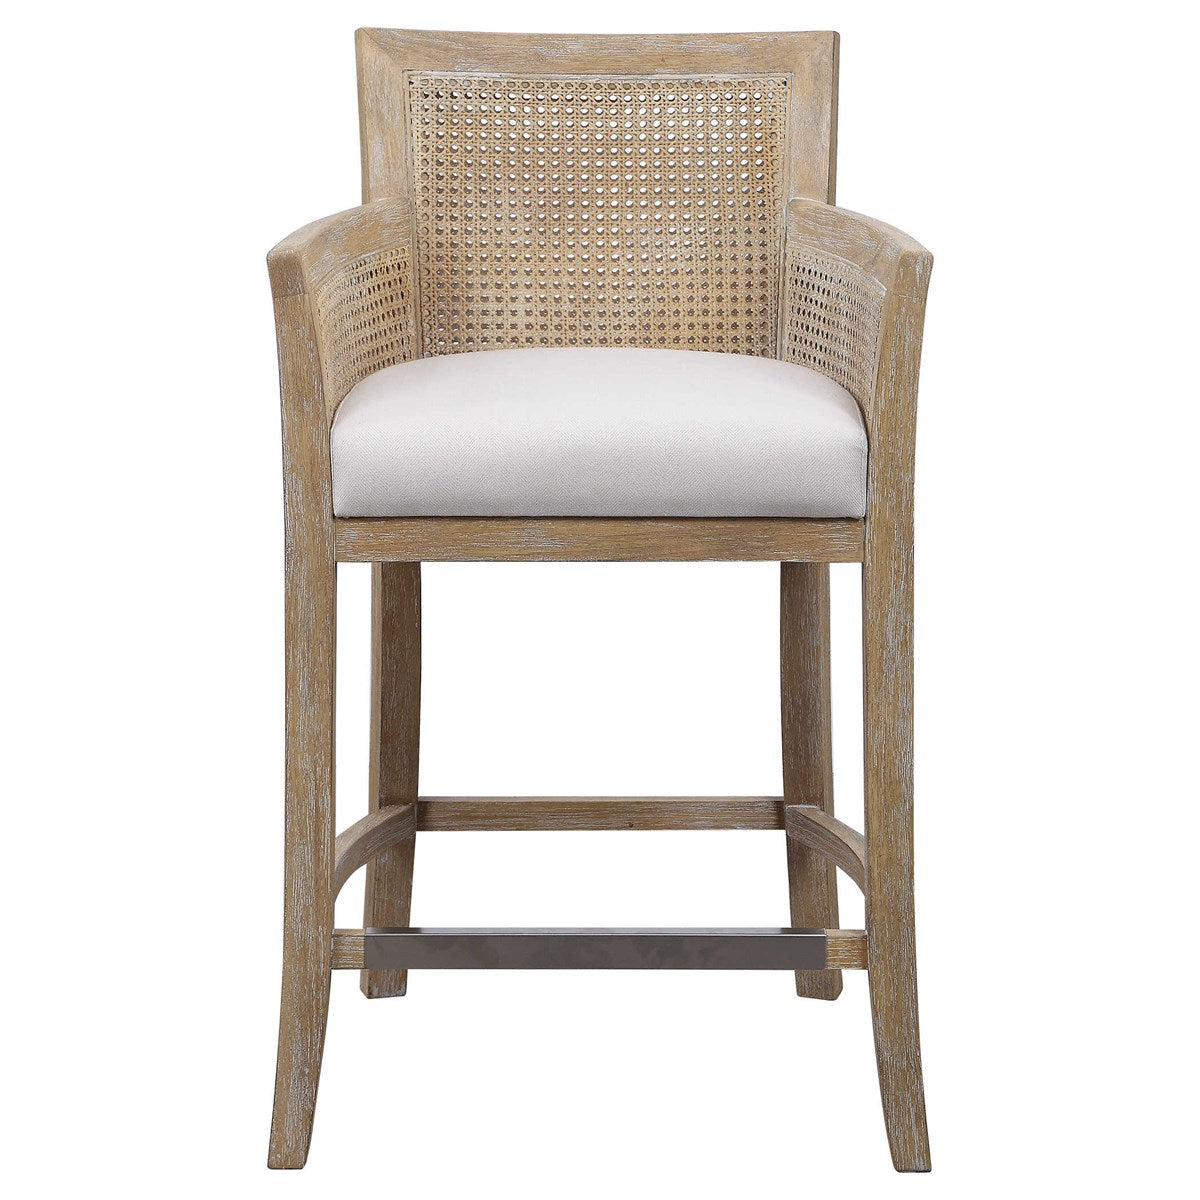 Ennis Off White Polished Nickel Counter Stool